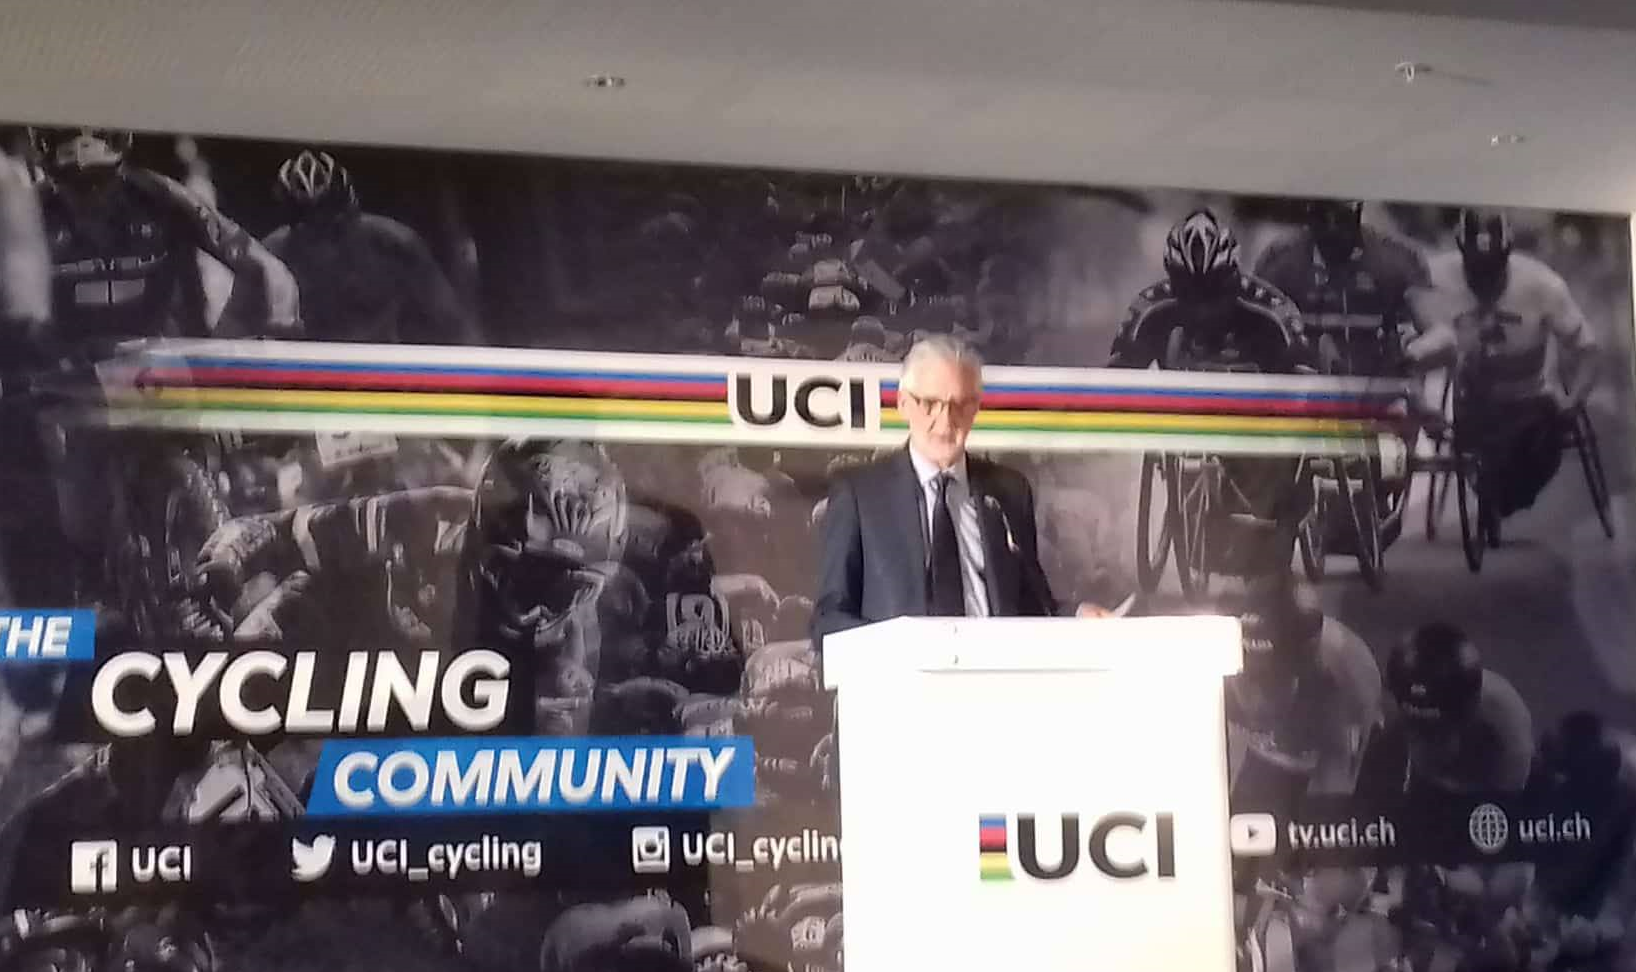 Pruszkow to host 2019 Track World Championships as UCI announce modernisation of several disciplines